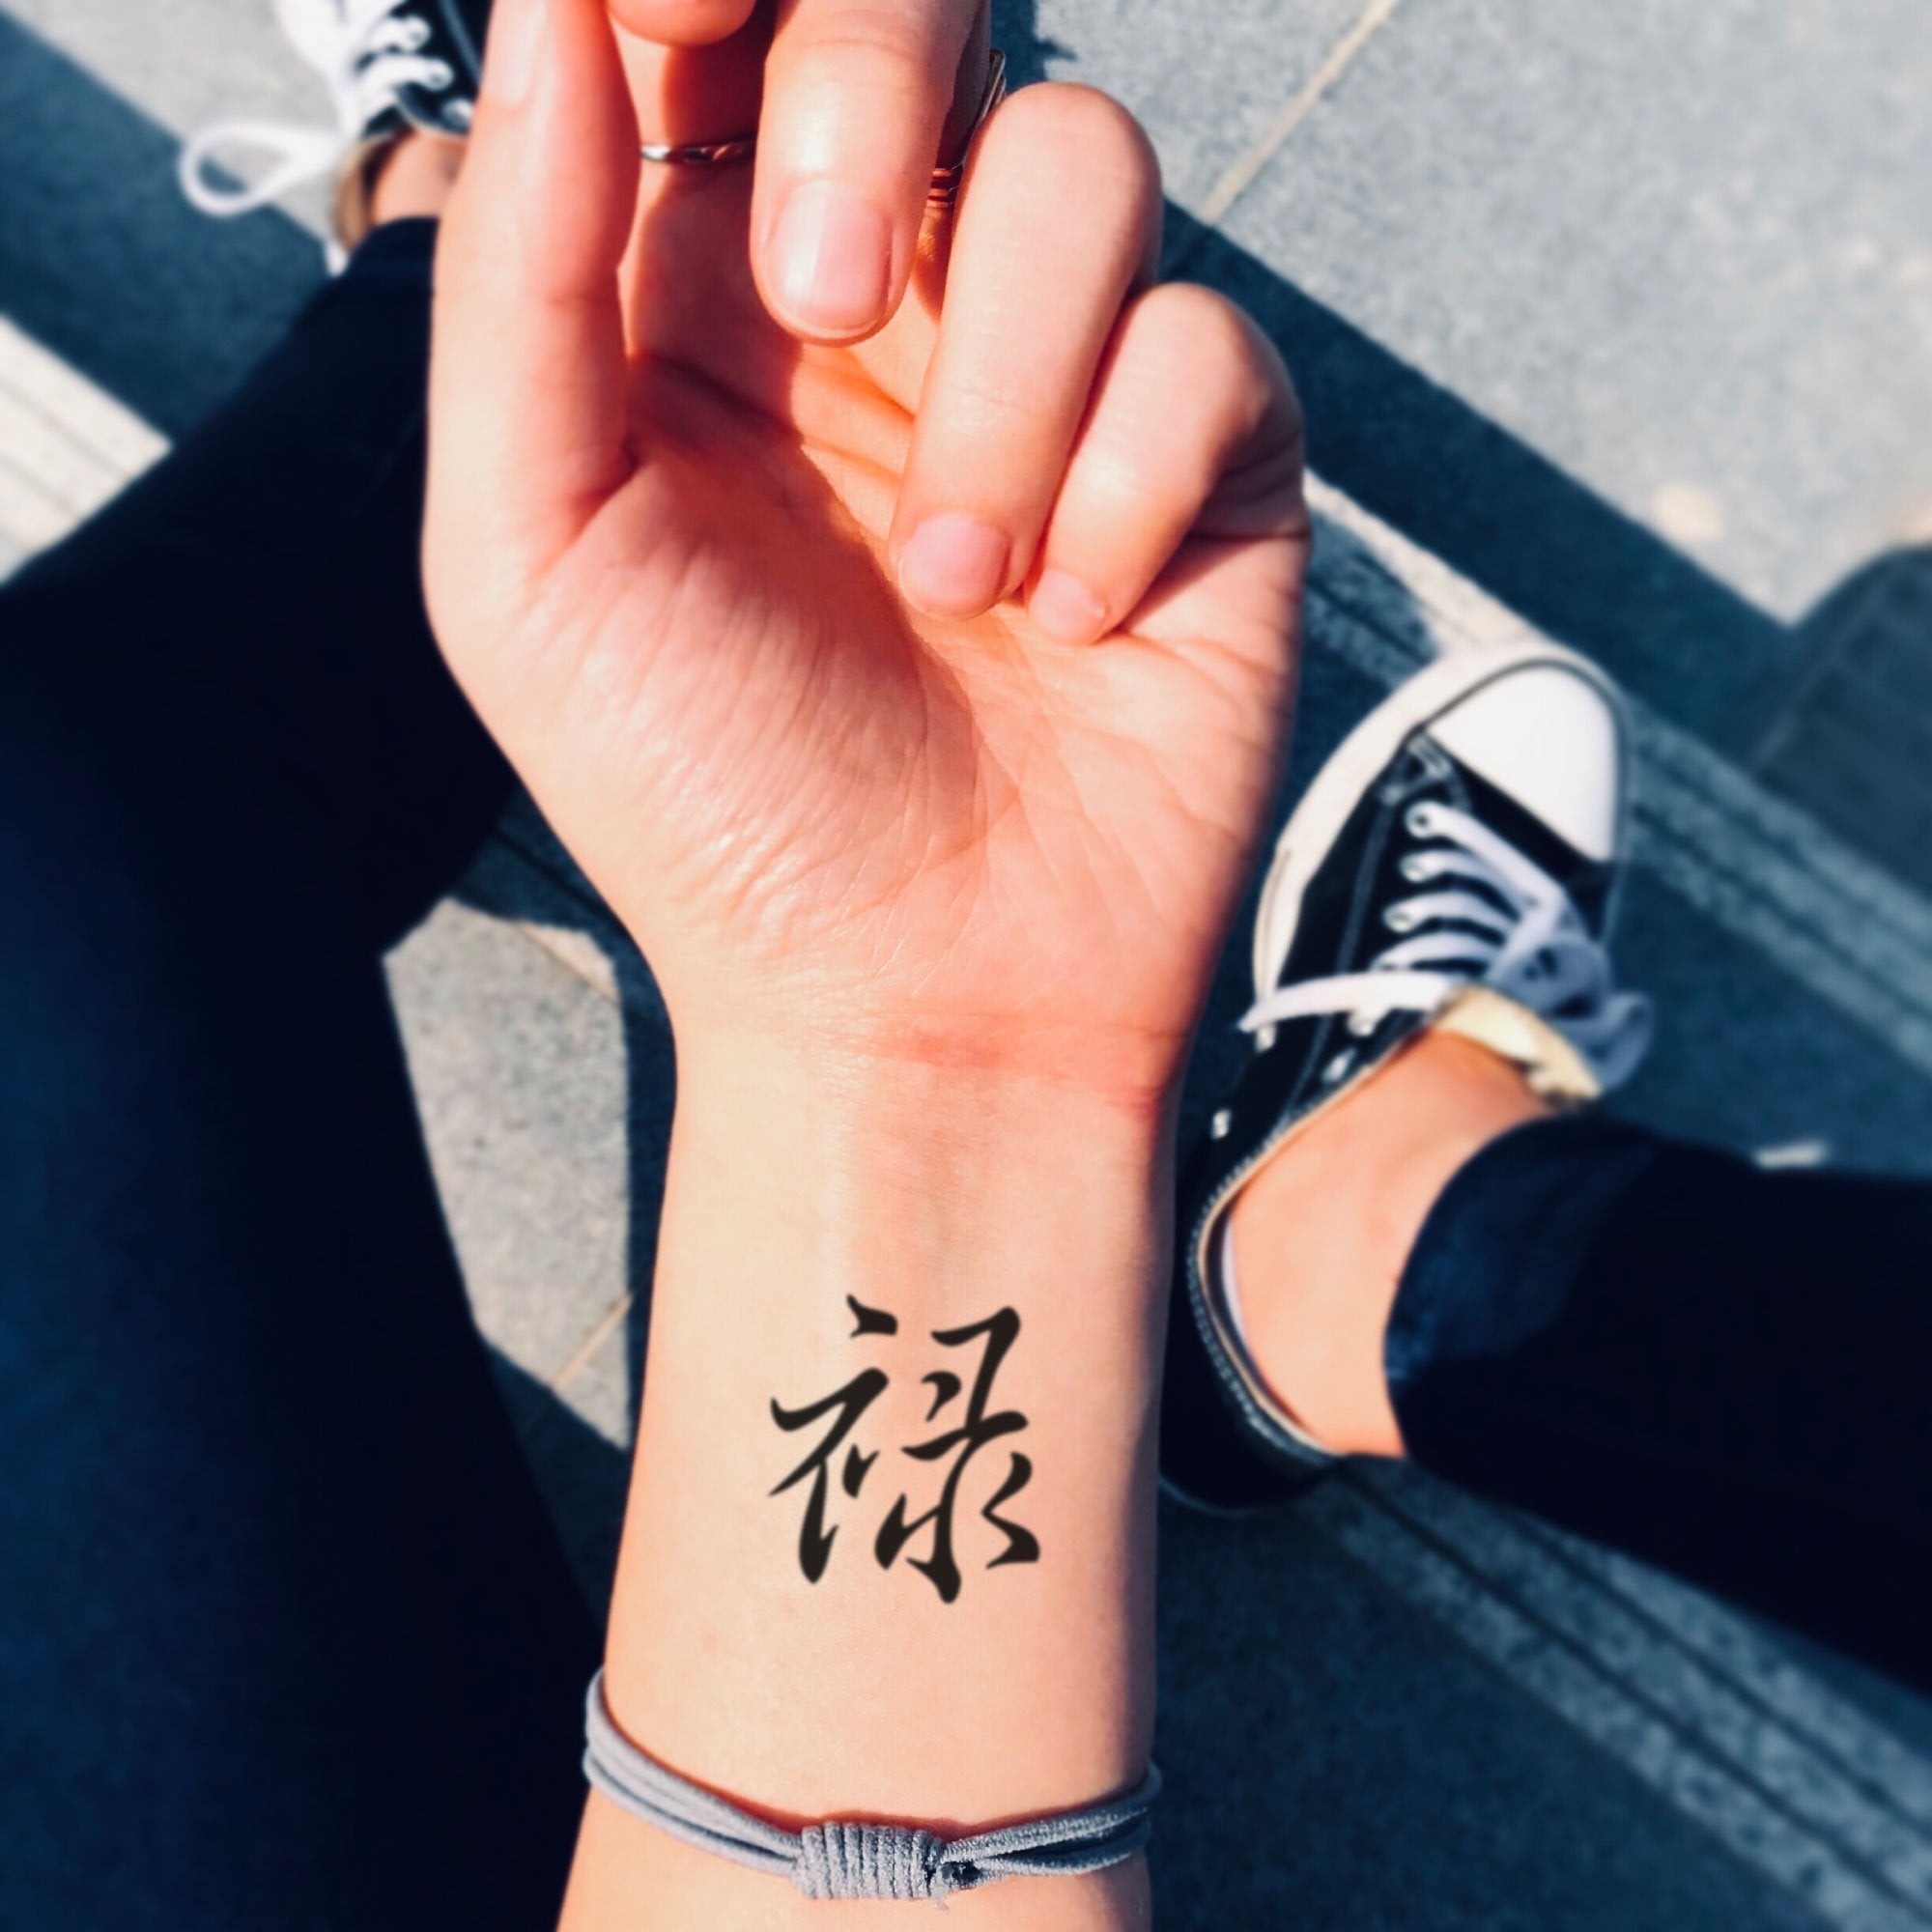 Karin Kirkpatrick, FCPA, FCMA on LinkedIn: My daughter recently got a tattoo  of the name she was given at the…